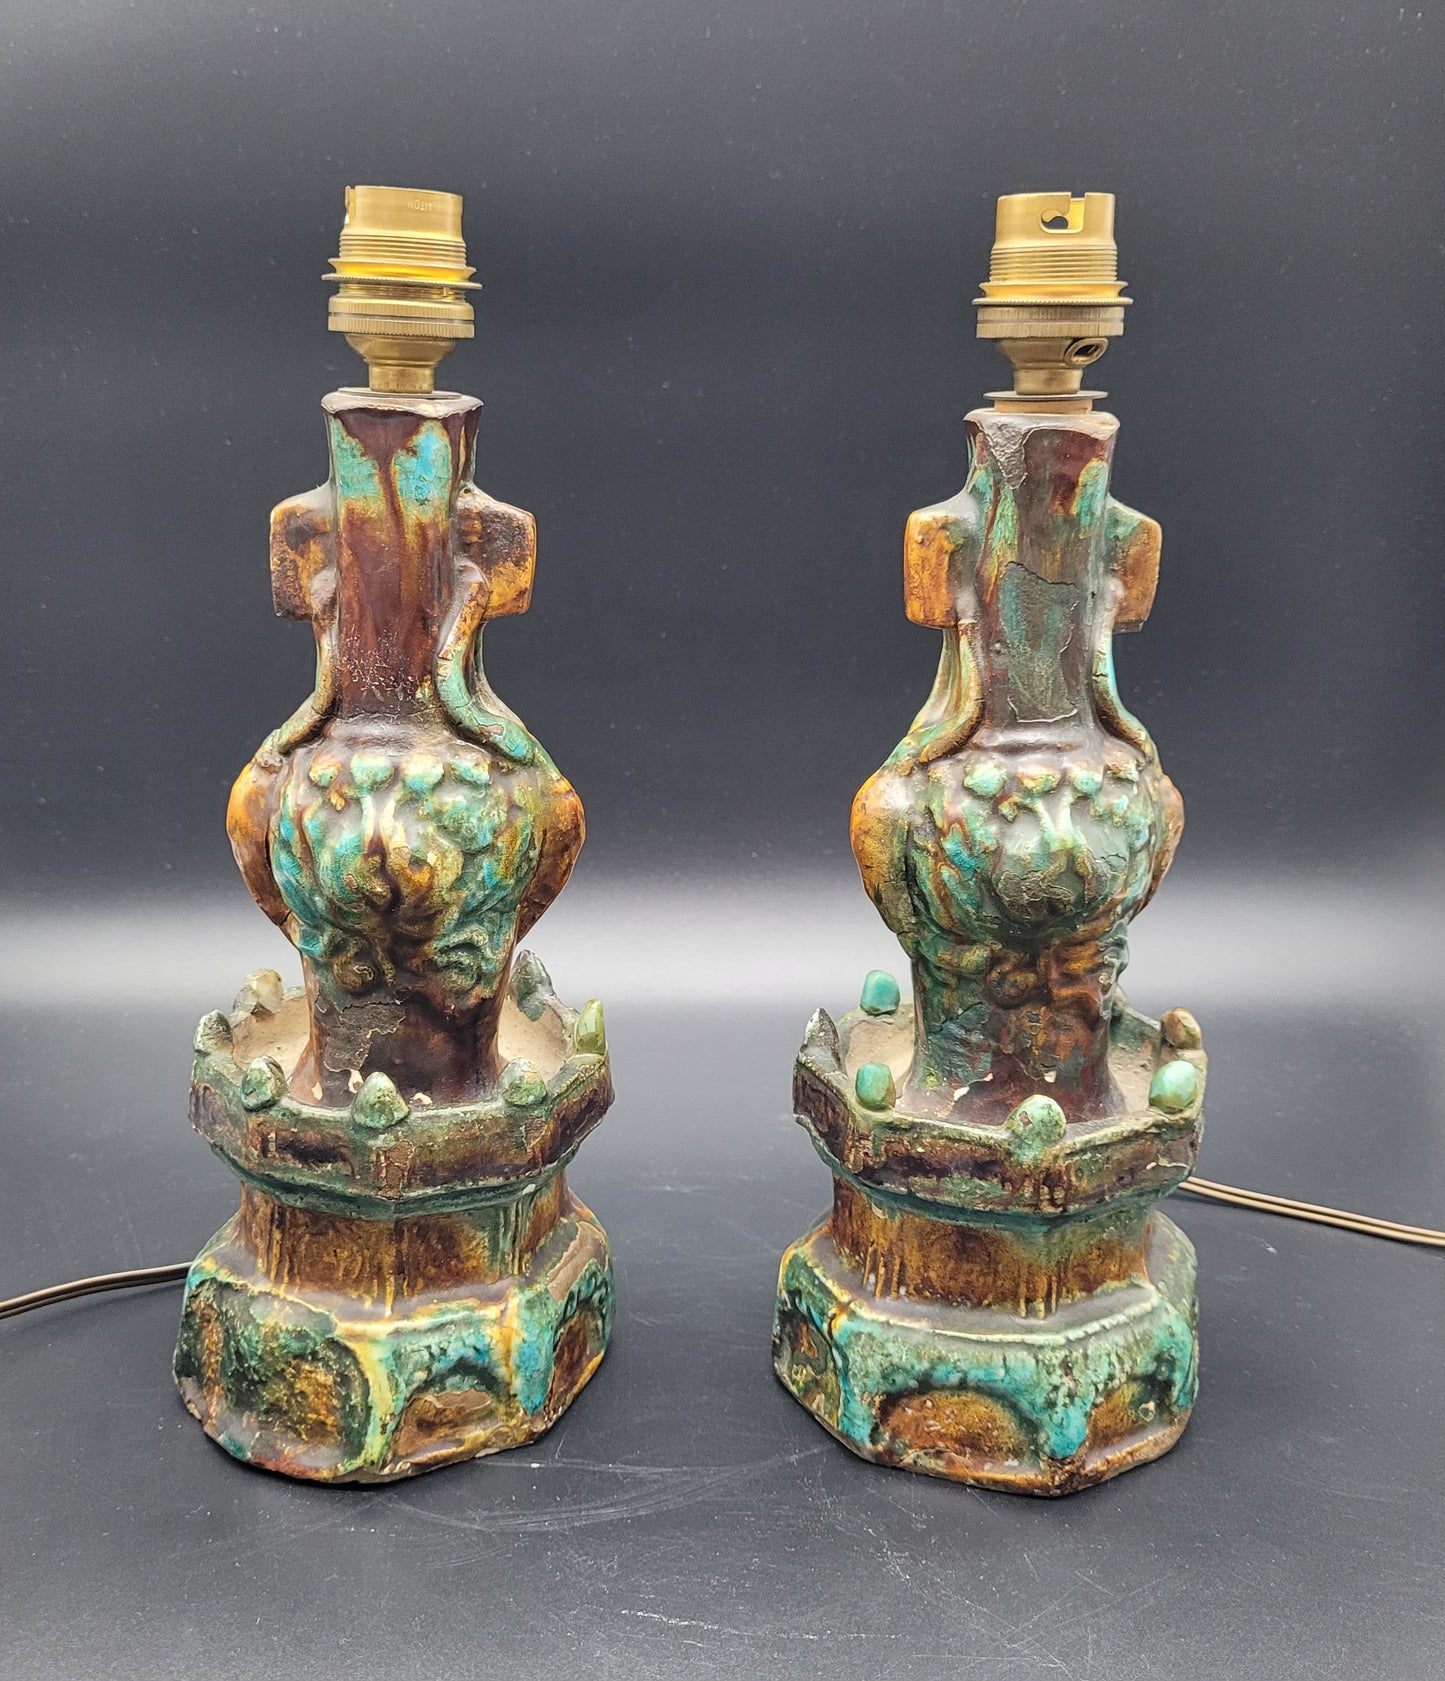 Buy Antiques Online Chinese Ming Dynasty Pottery Candle Sticks 16th / 17th Century